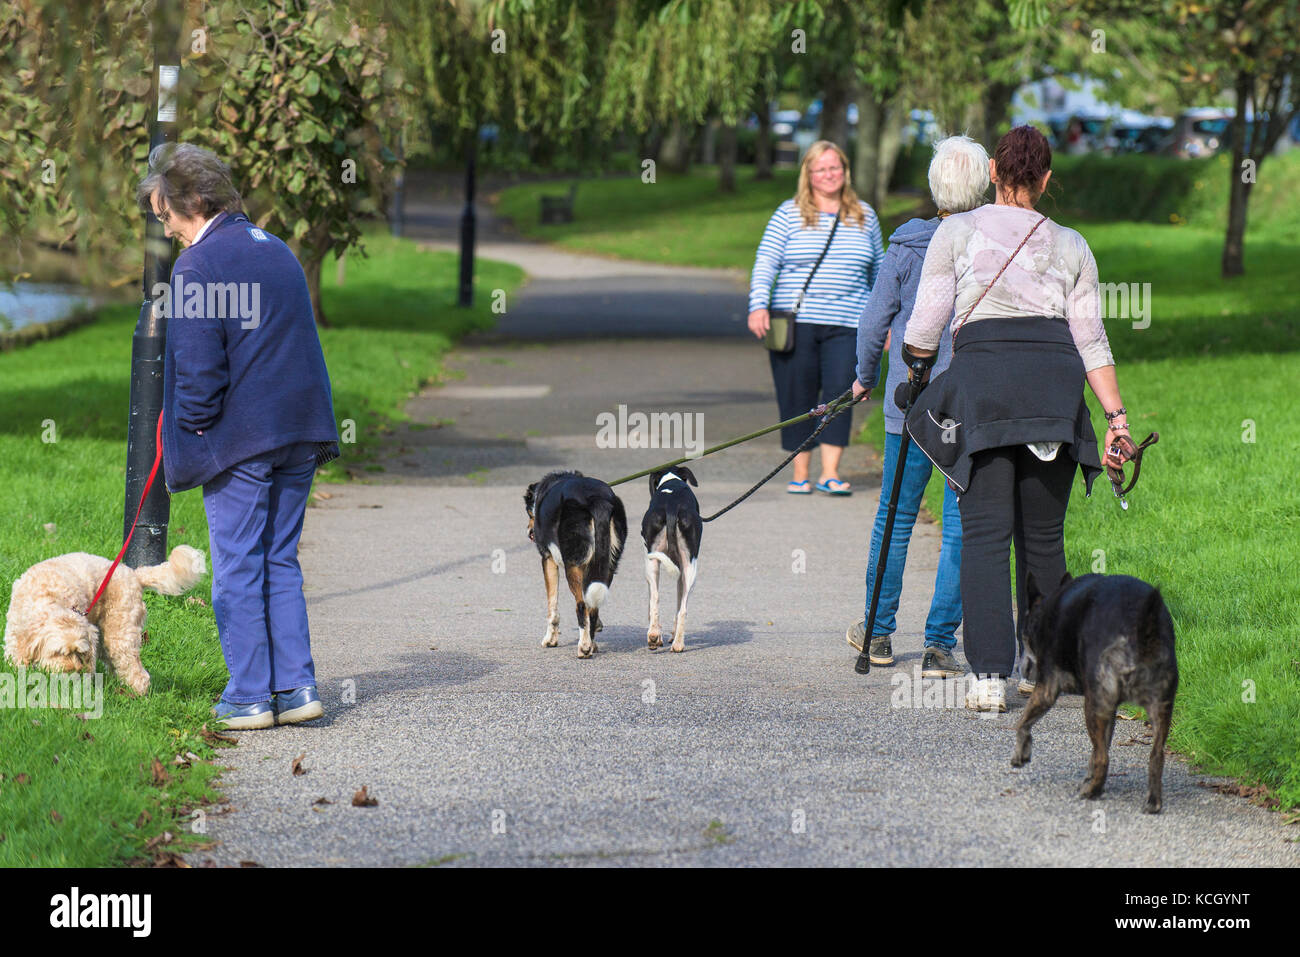 Dog walkers - people walking their dog in a park. Stock Photo